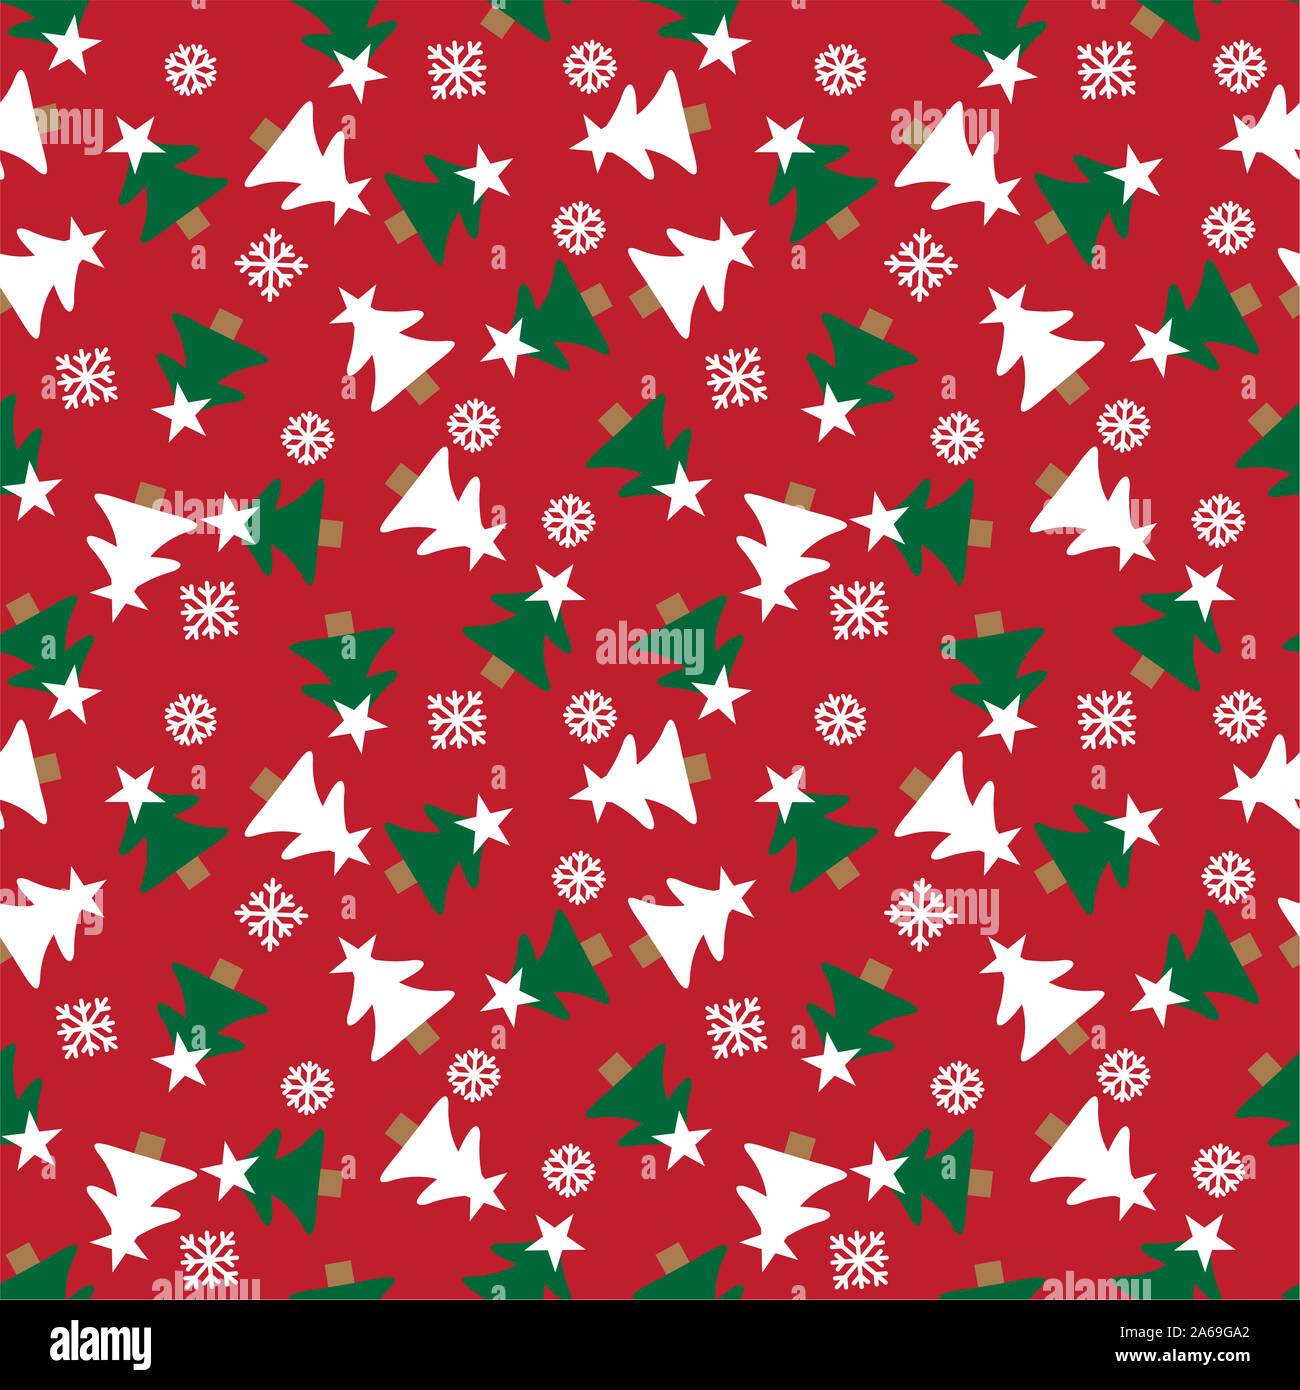 HD wallpaper Holiday Christmas Pattern Red Reindeer backgrounds full  frame  Wallpaper Flare